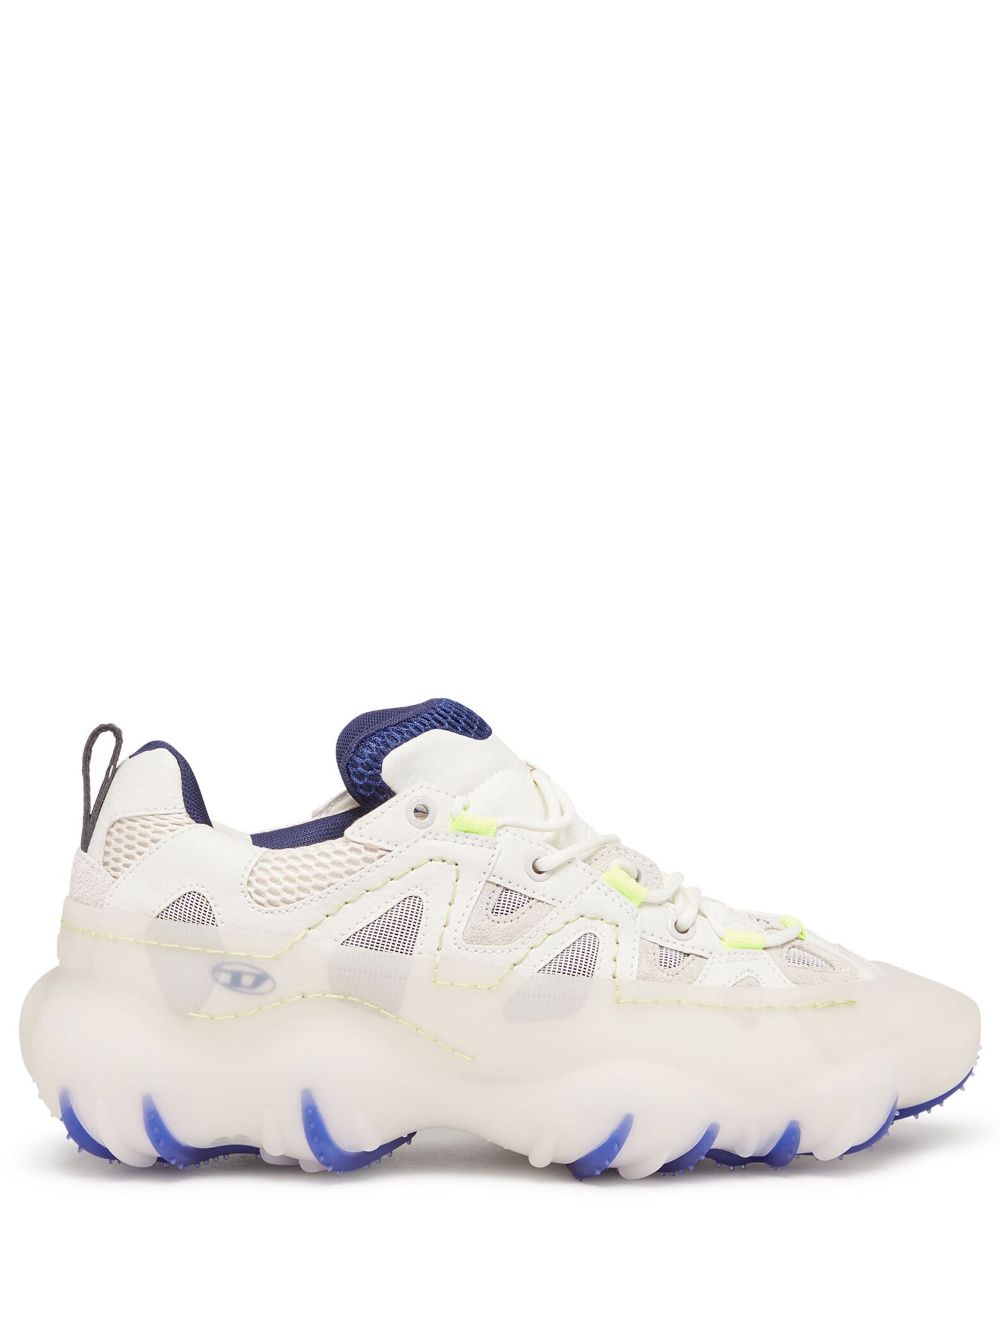 Diesel Low-top Sneakers With Rubber Overlay In White